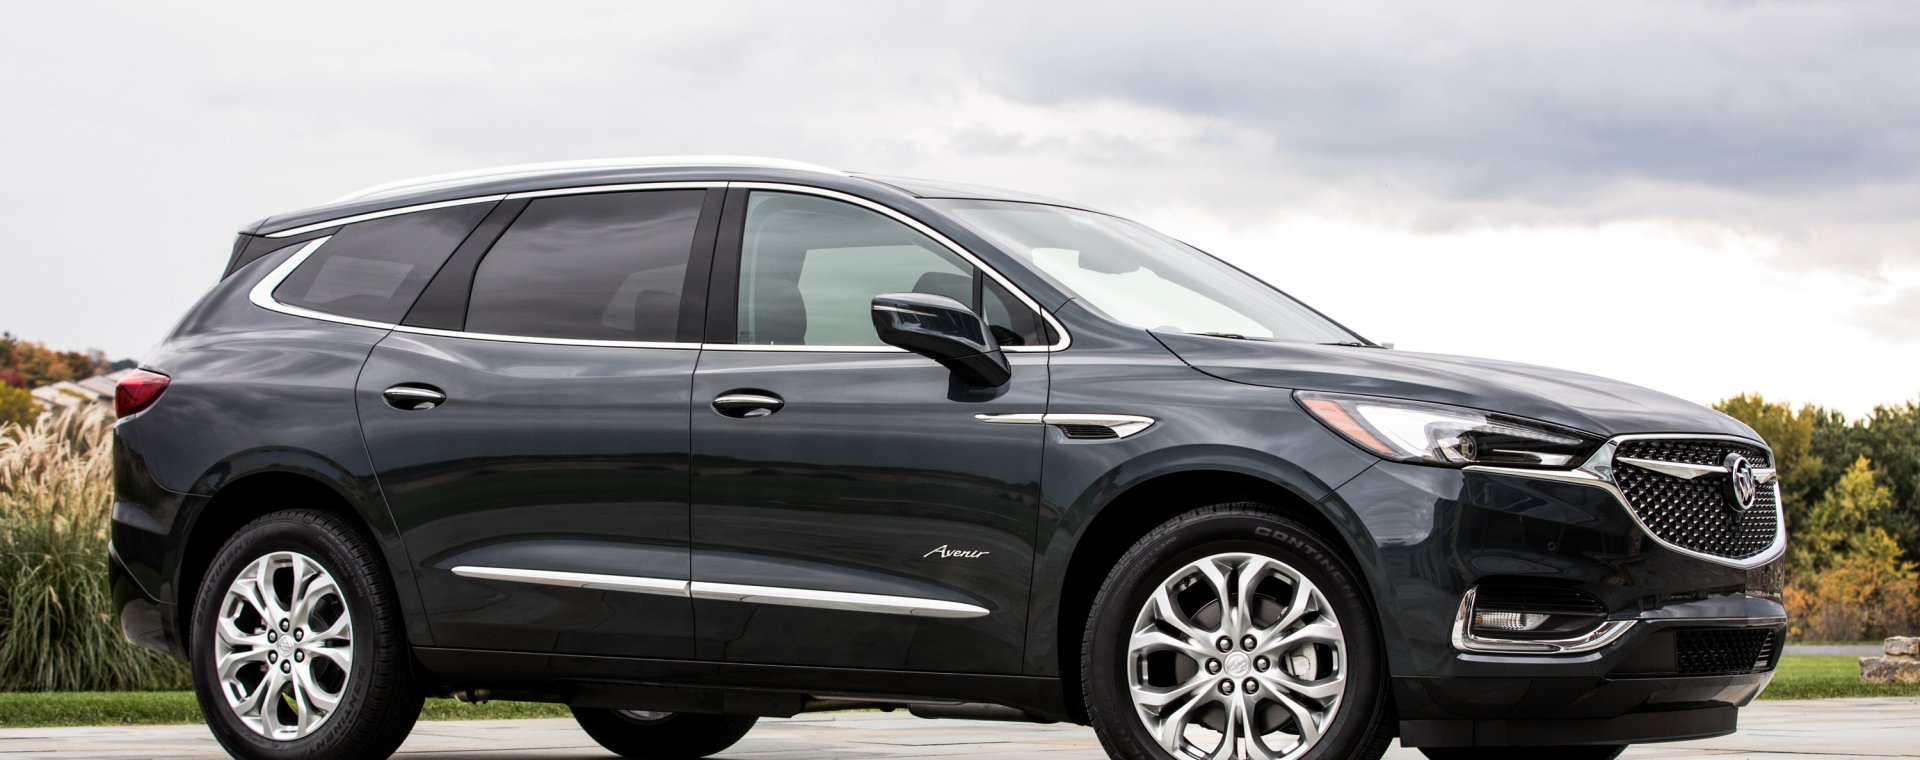 Immaculate 2019 Buick Enclave Made the List of SUVs that depreciate the fastest, pictured on pavement under an overcast sky